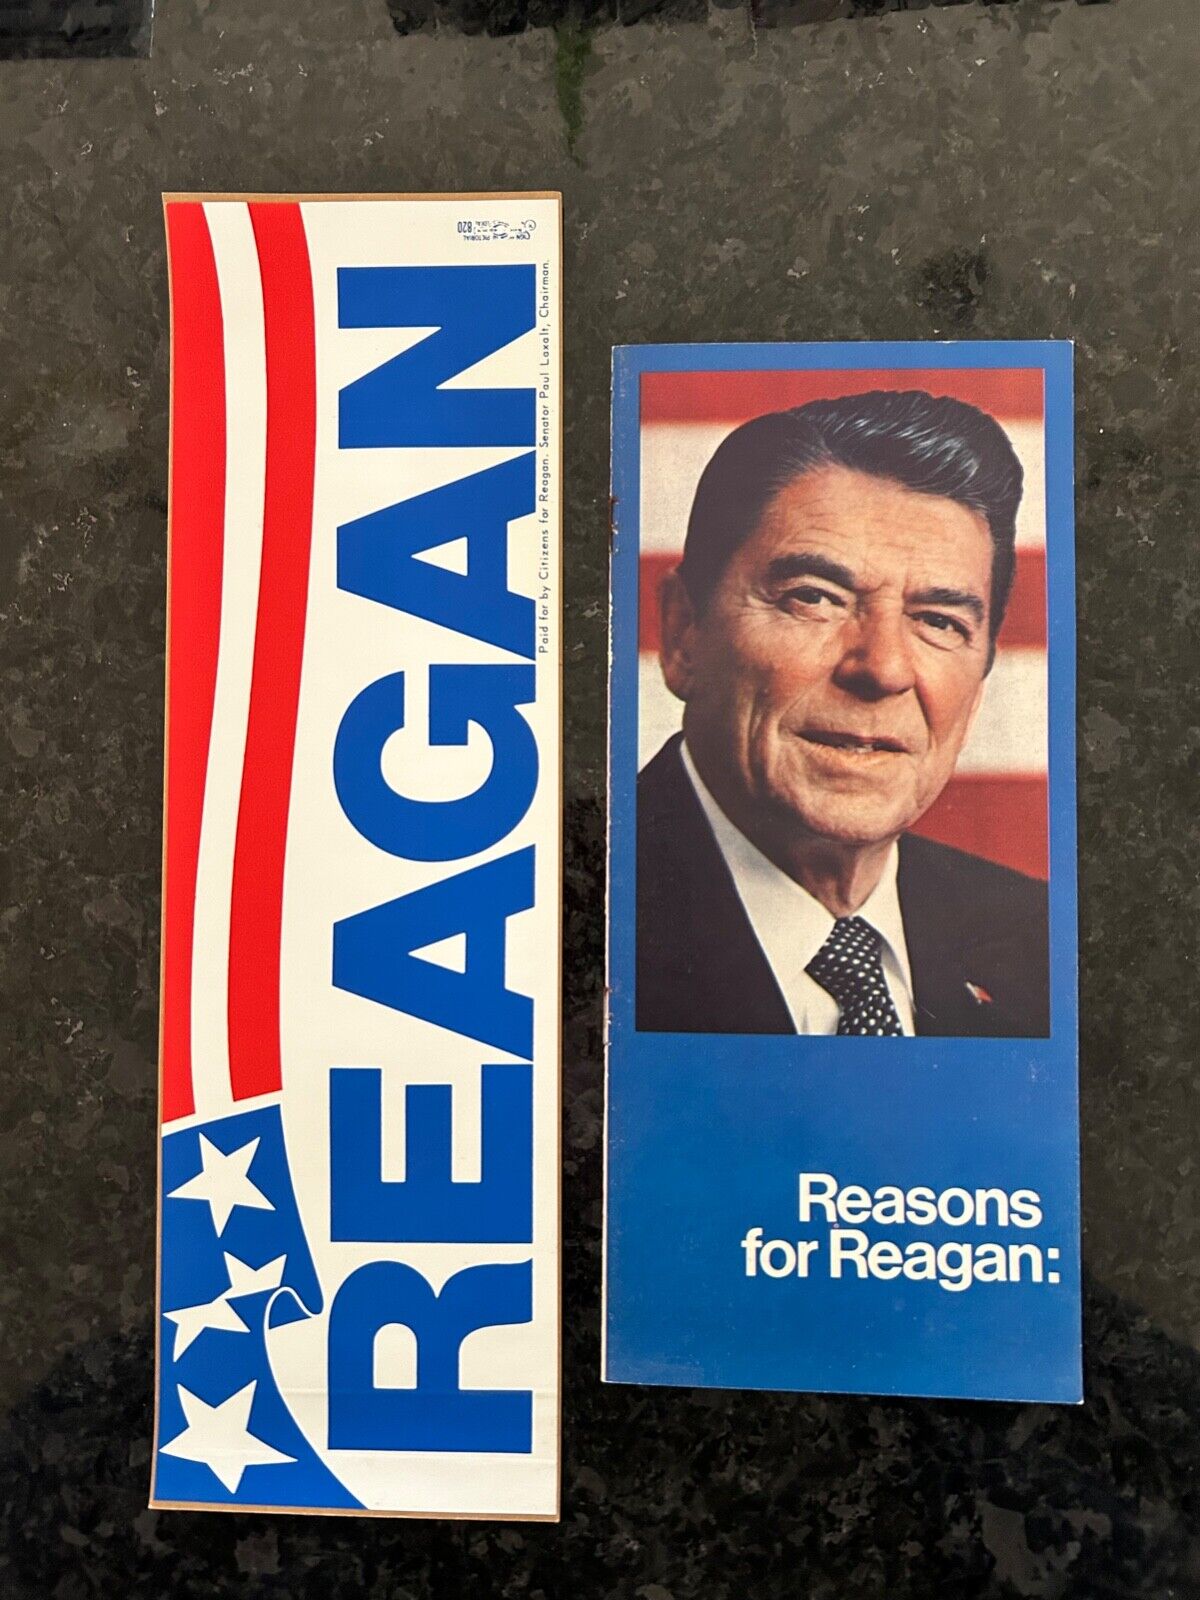 Ronald Reagan 1980 Campaign Bumper Sticker and Election Pamphlet 